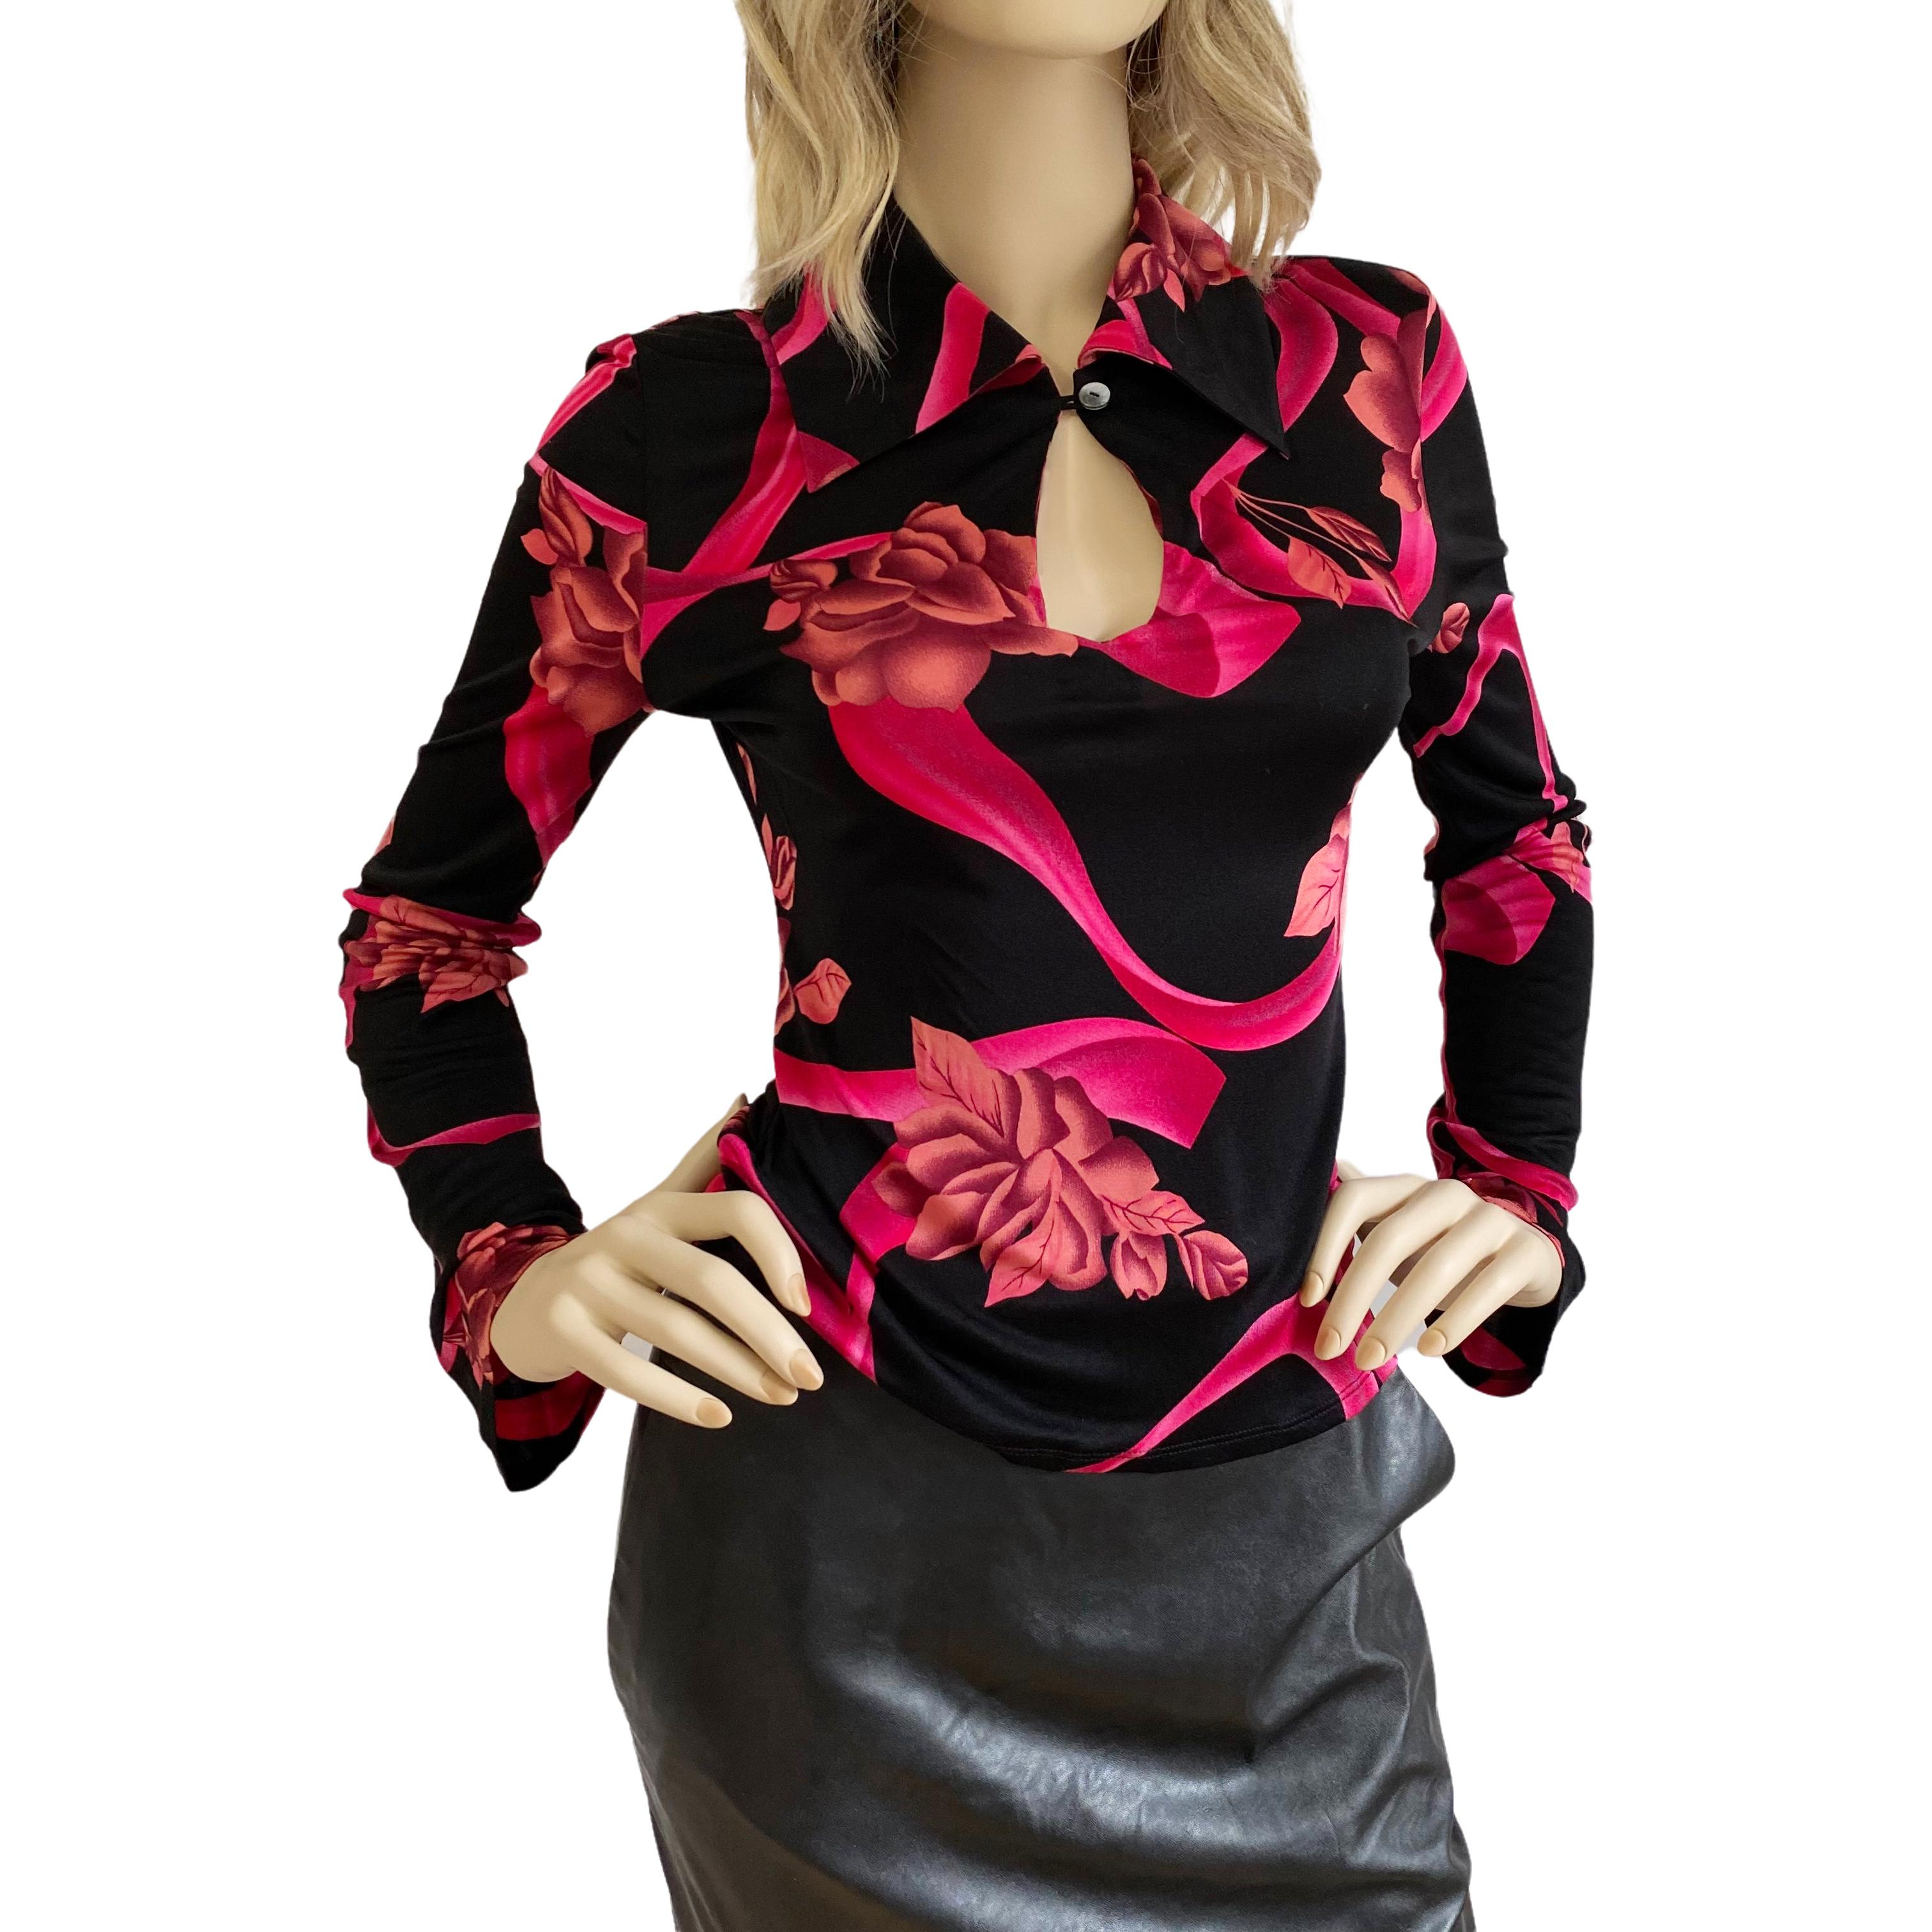 Cool silk shirt with loop + single abalone button  - creates a peekaboo effect when buttoned.
Slightly bell sleeves.
Hand-designed, floral print on black ground.
Approximately 23